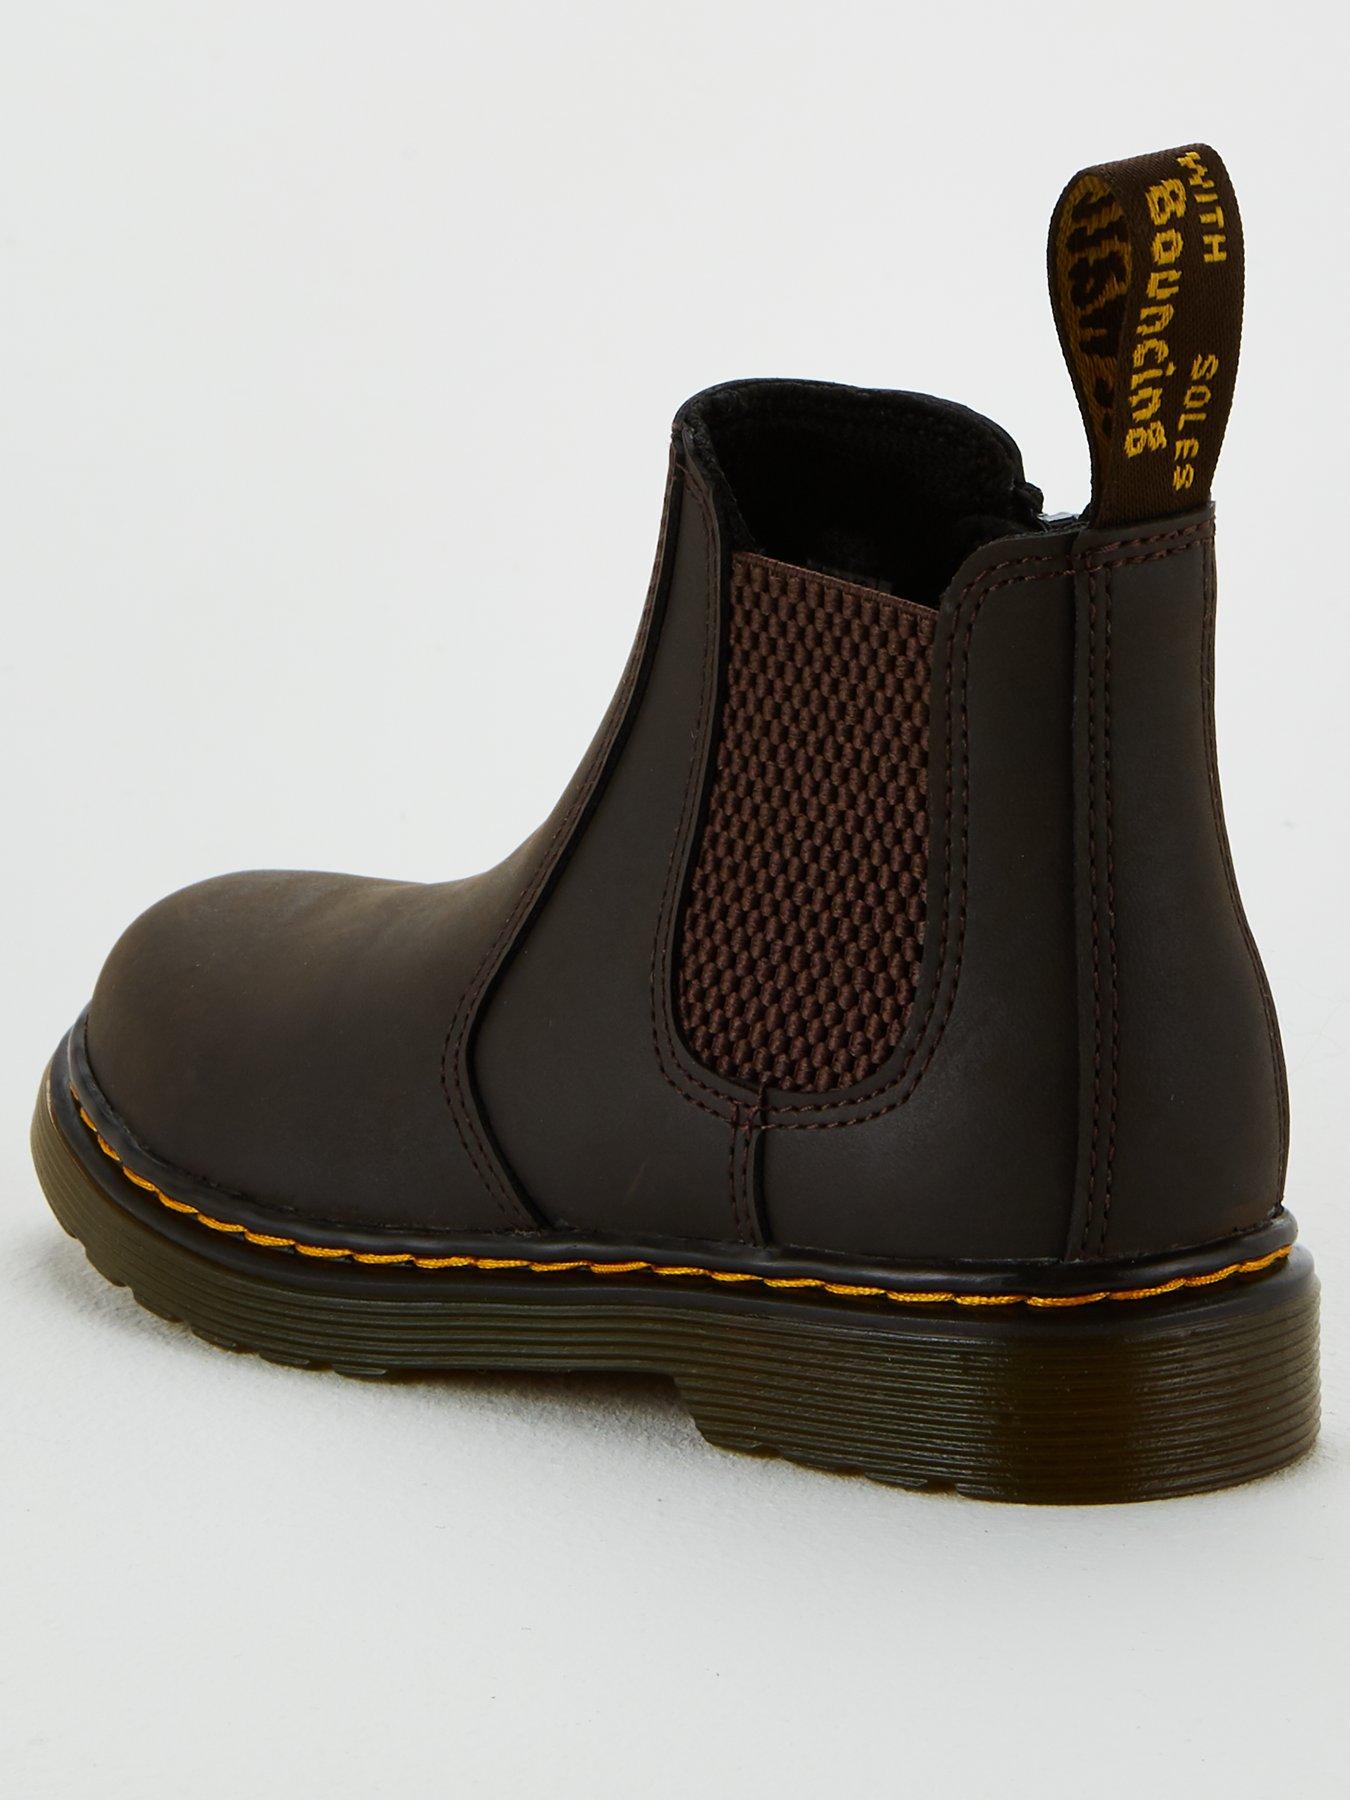 childrens chelsea boots